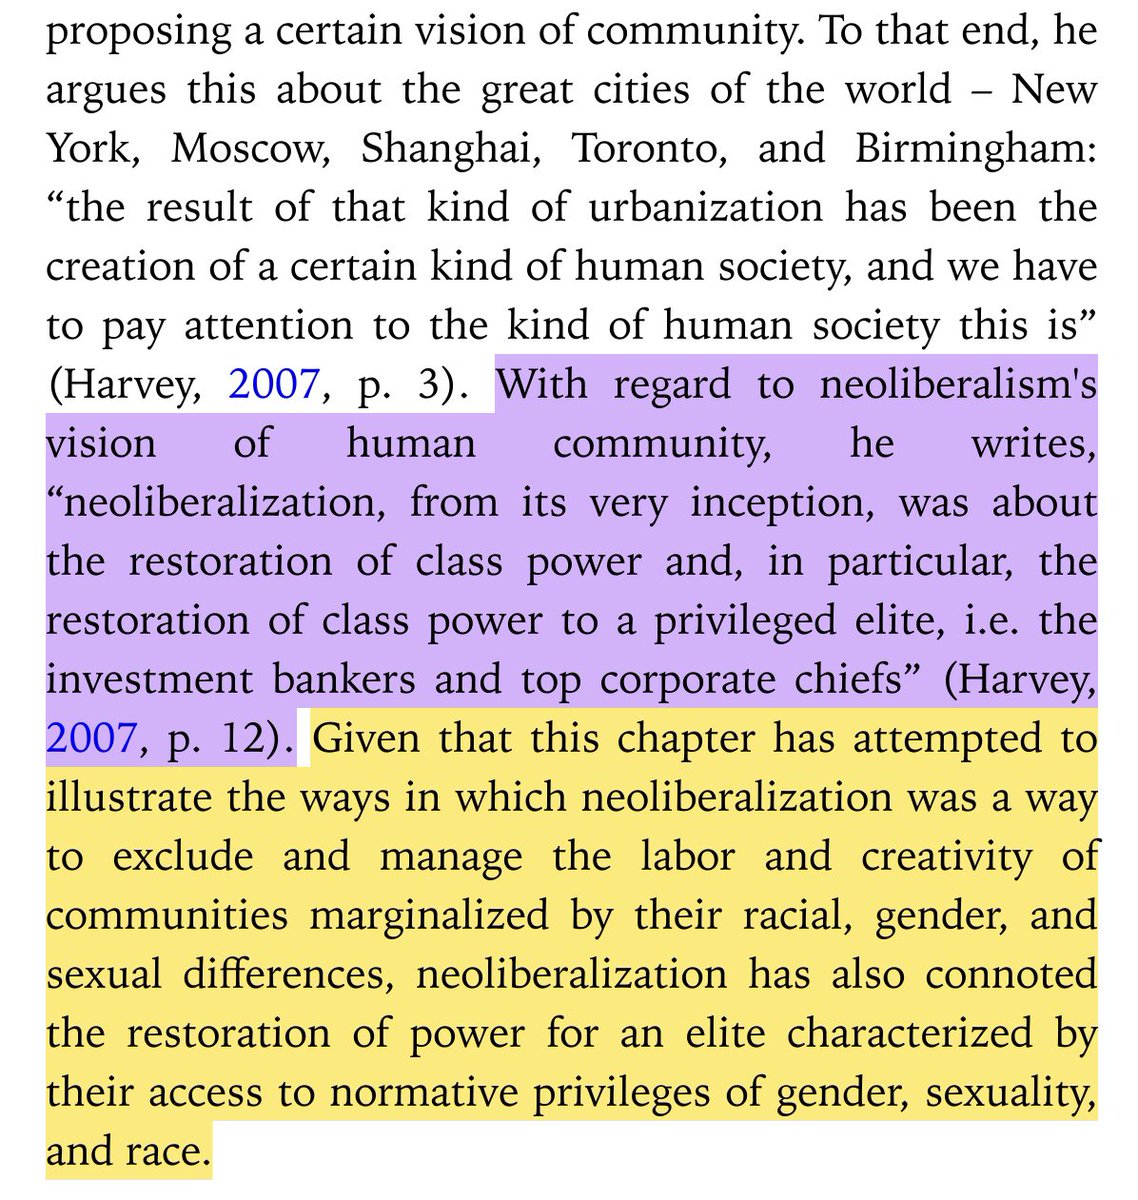 “neoliberalization was a way to exclude & manage the labor & creativity of communities marginalized by their racial/gender/sexual differences, neoliberalization has also connoted the restoration of power for an elite characterized by their access to normative privileges...”